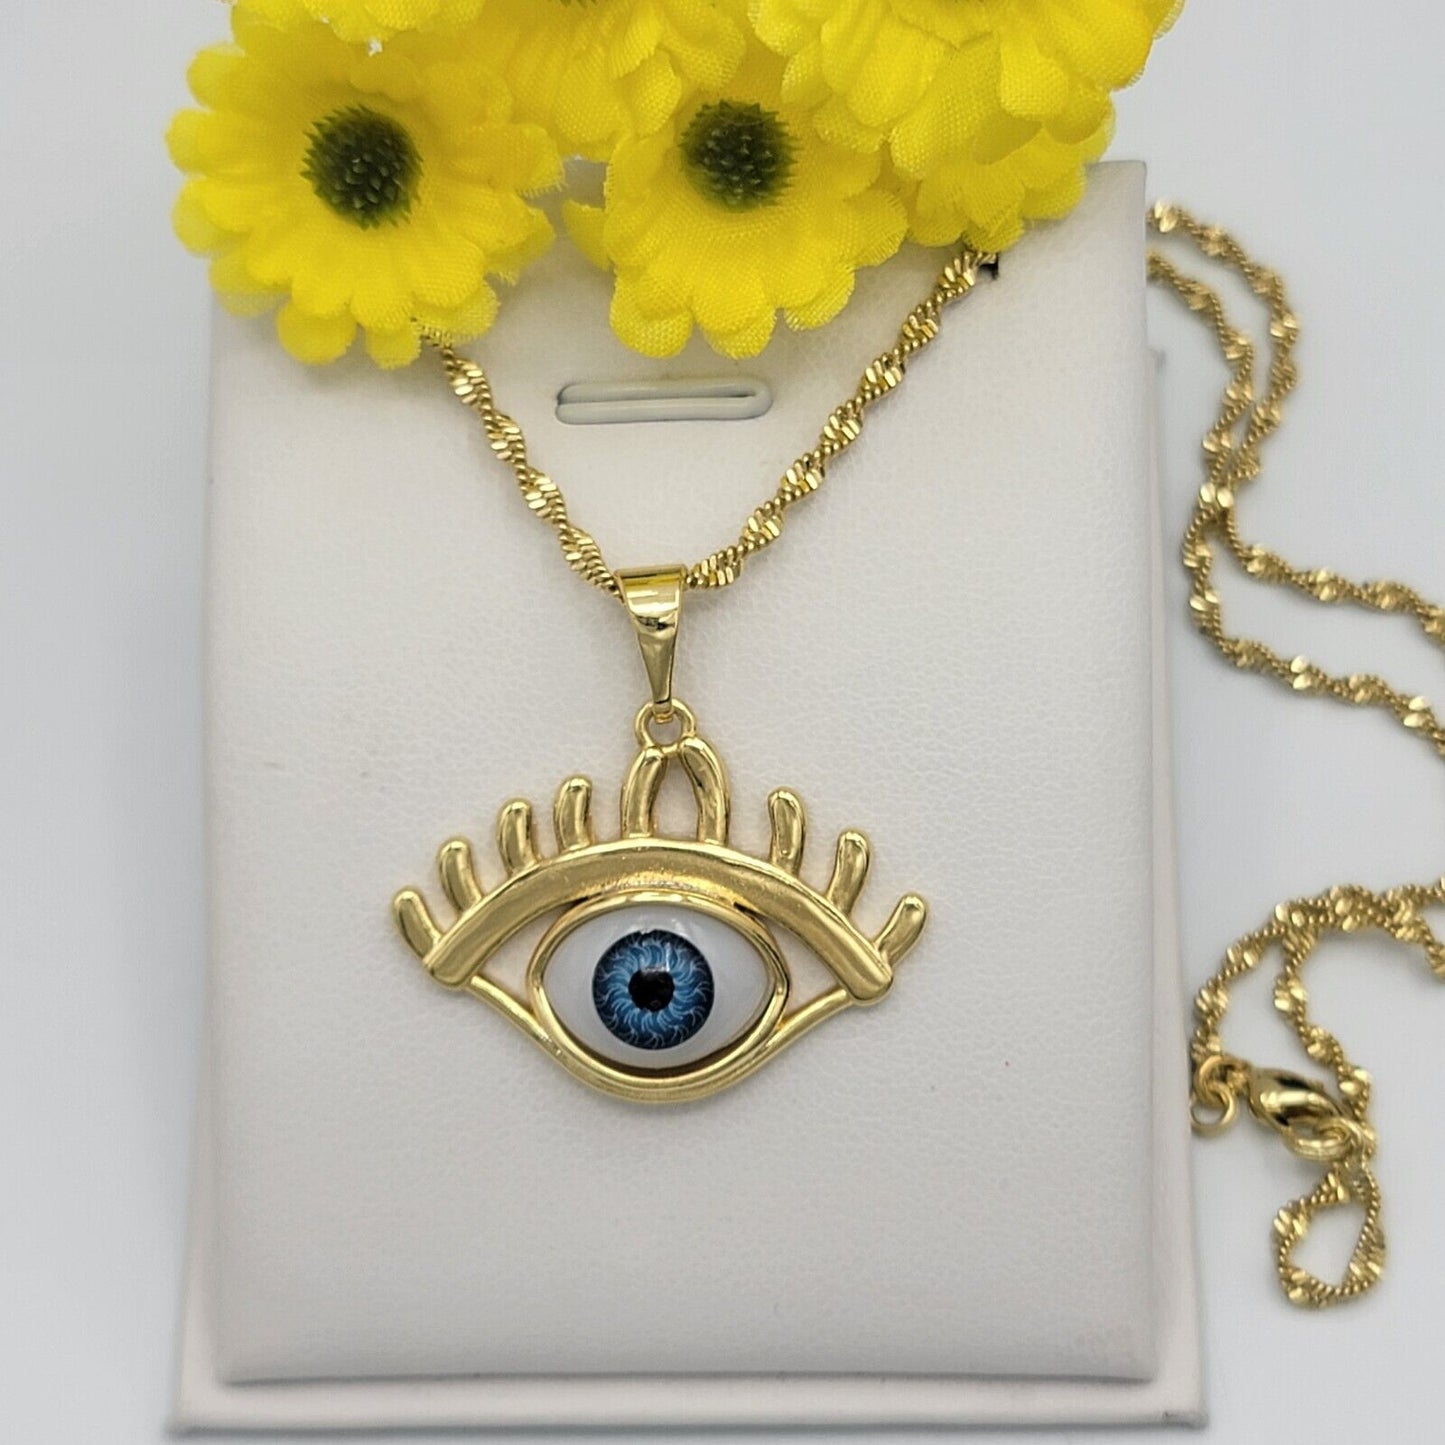 Necklaces - 14K Gold Plated. Eye Pendant & Chain.